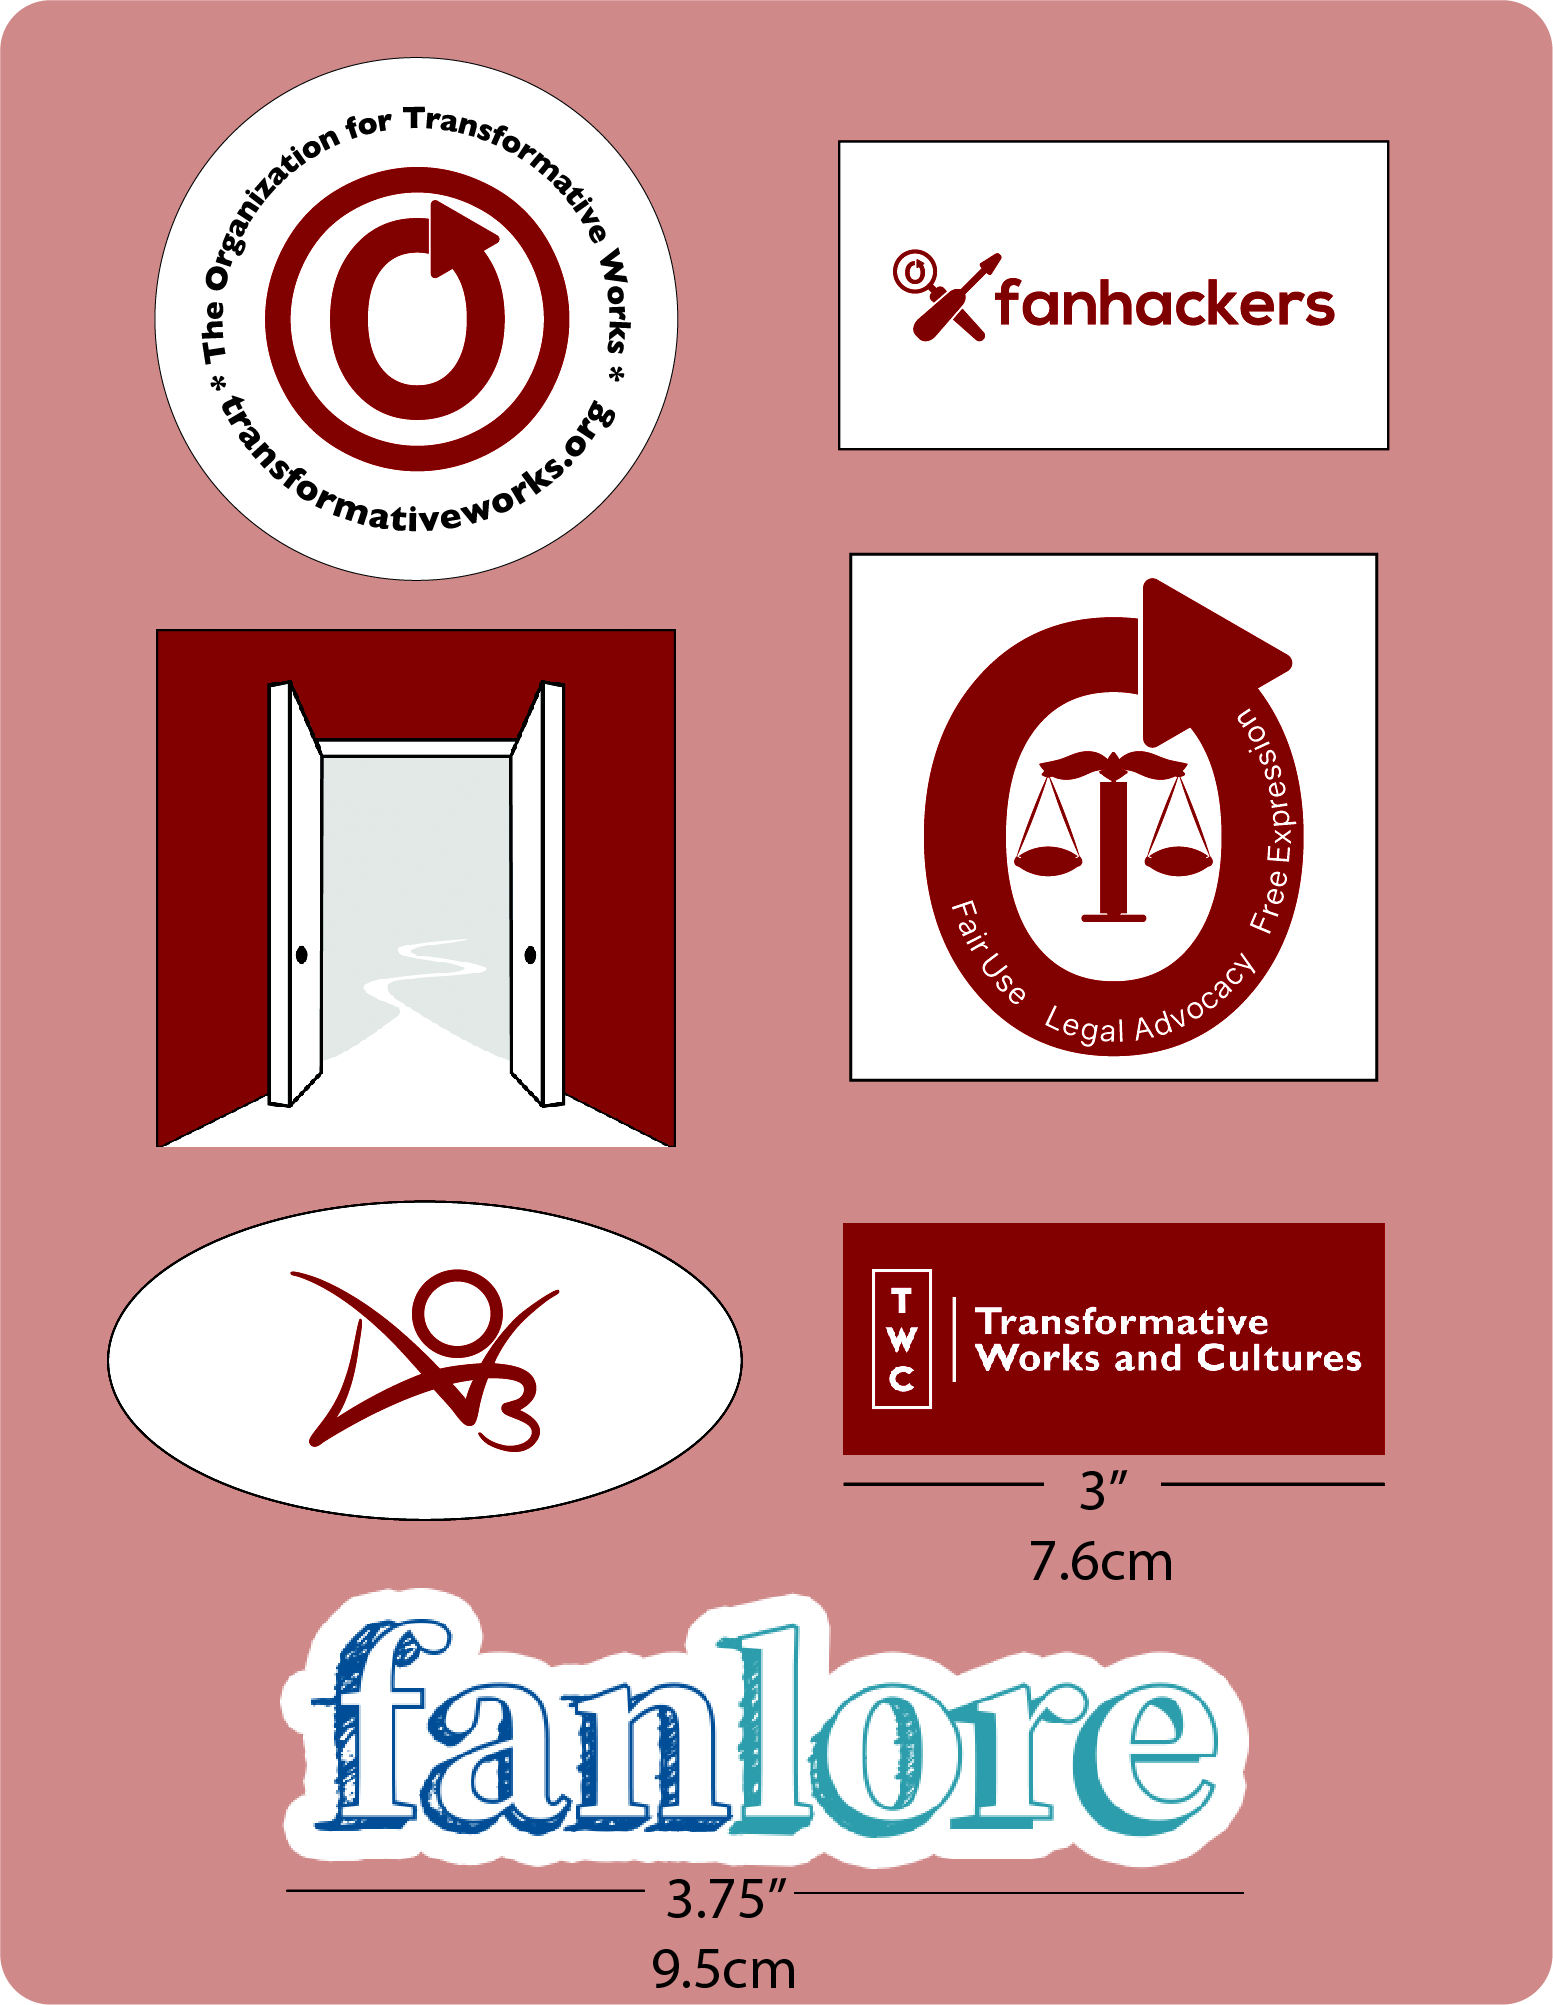 OTW Sticker Set (contains seven stickers). The first six stickers measure 7.6cm wide: (1) A white circle with the red OTW logo, a circular arrow inside a circle. Around the logo in black are the words "Organization for Transformative Works" and the URL "transformativeworks.org". (2) A white rectangle with the red Fanhackers logo, two hand tools crossed in a X. (3) A red square with the white and grey Open Doors logo, French doors opening to reveal a path. (4) A white square with the Legal Advocacy logo, a circular arrow surrounding the scales of justice. The arrow reads "Fair Use, Legal Advocacy, Free Expression". (5) A white oval with the red Archive of Our Own logo, a stylized AO3. (6) A red rectangle with the TWC logo in white; on the left are the letters TWC in a vertical arrangement, and on the right are the words "Transformative Works and Cultures". (7) A die cut of the Fanlore logo, blue text on a white background. This sticker measures 9.5cm long.